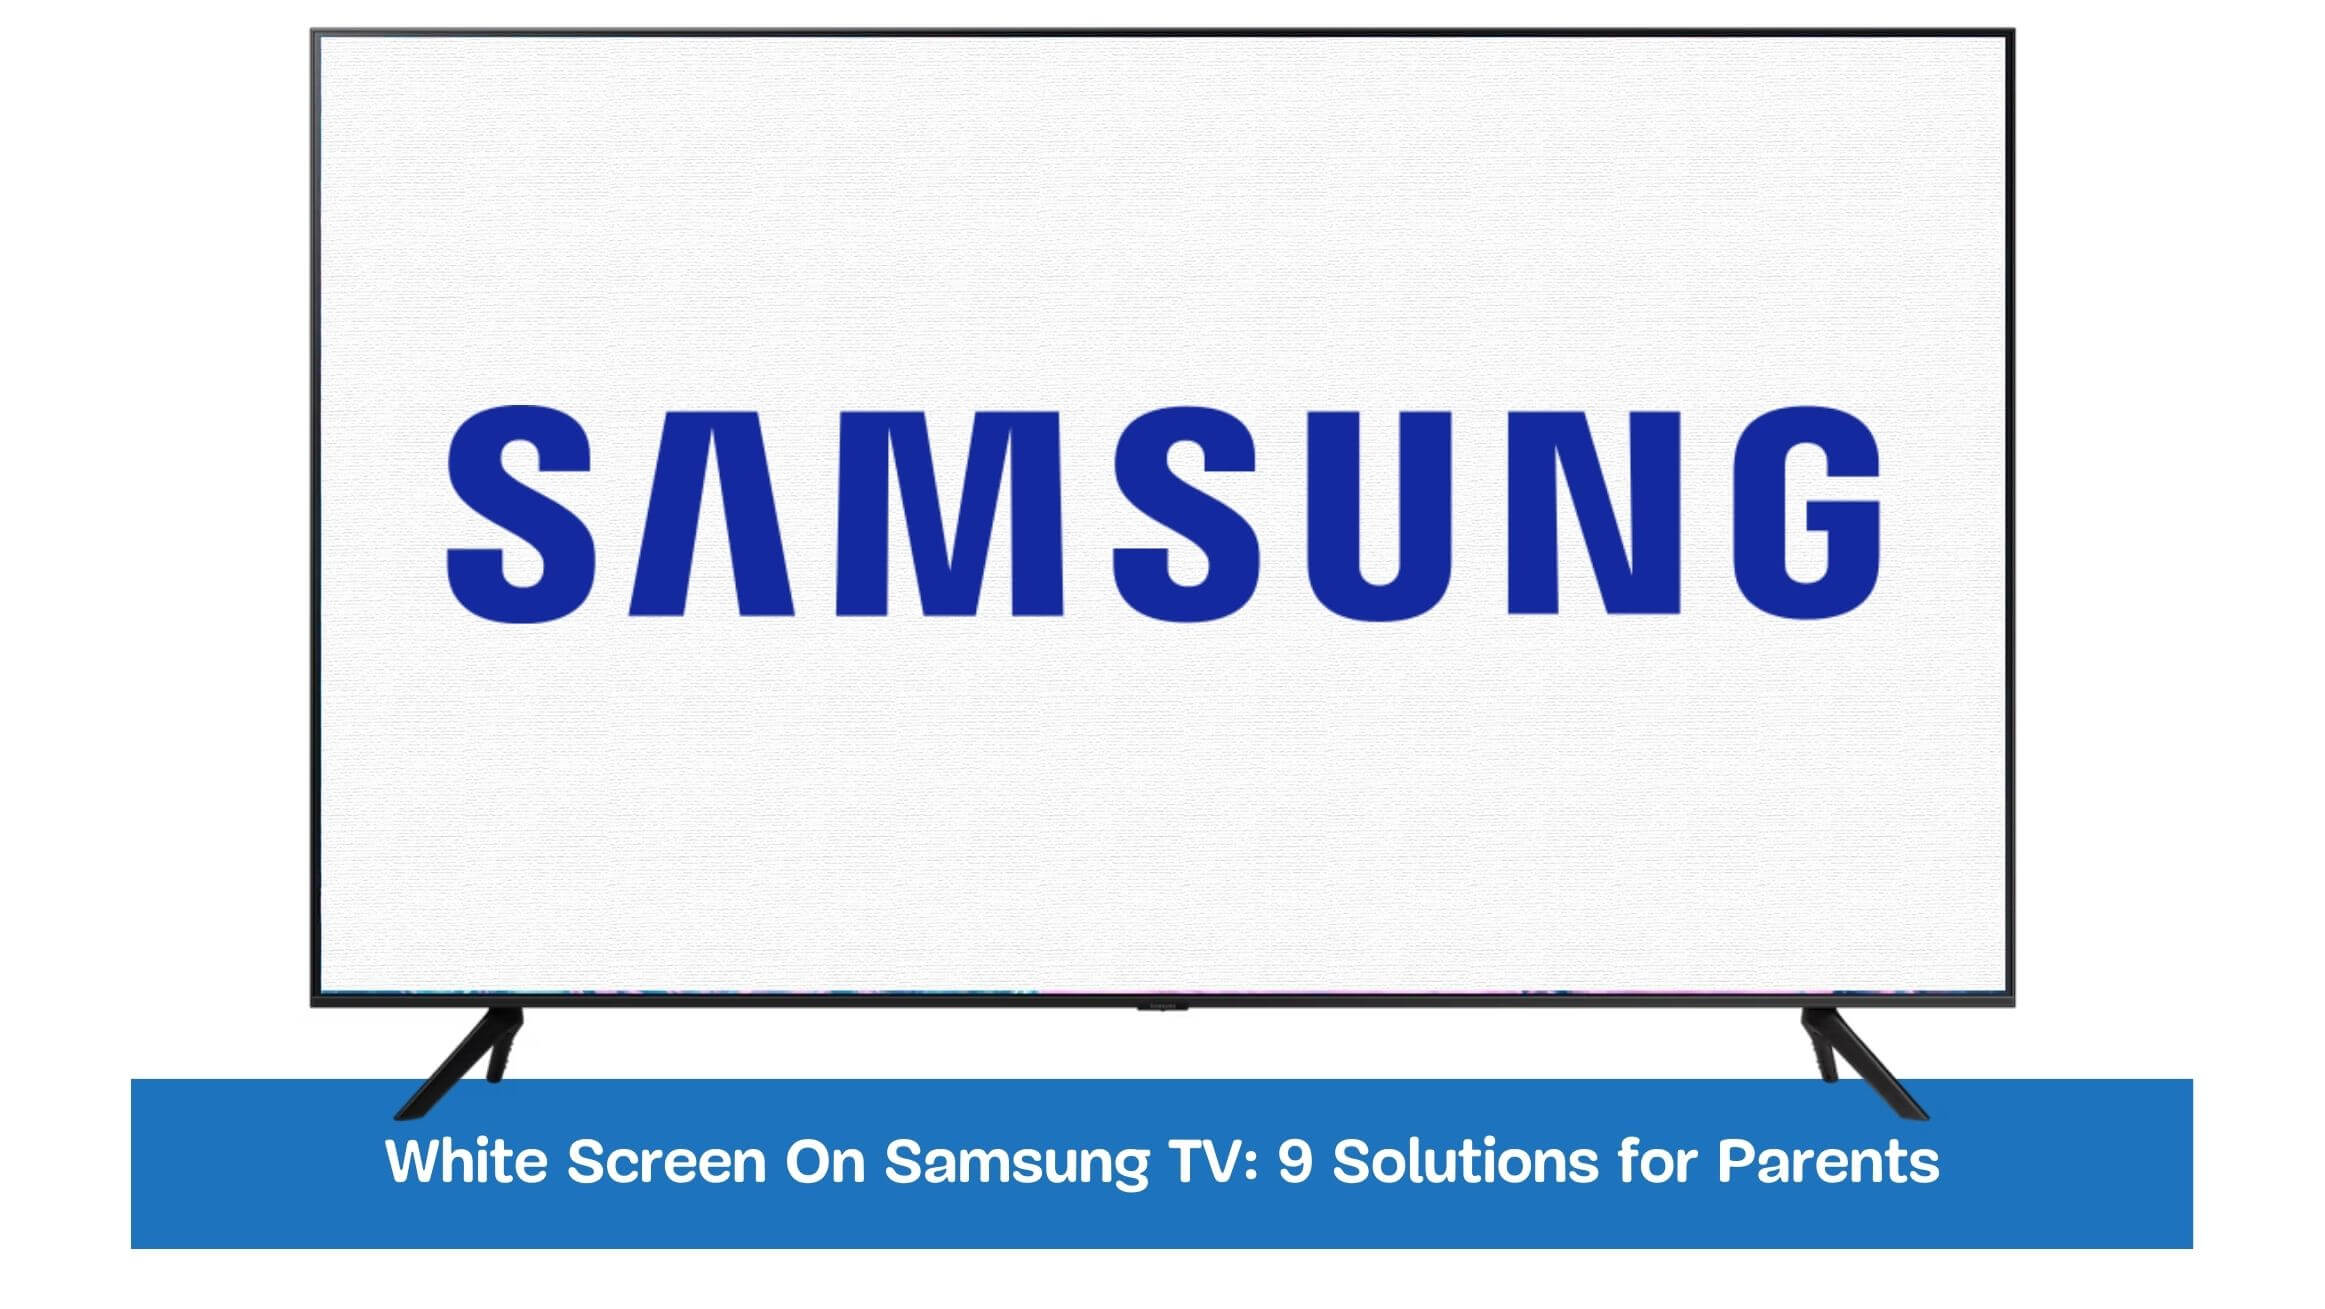 White Screen On Samsung TV: 9 Solutions for Parents